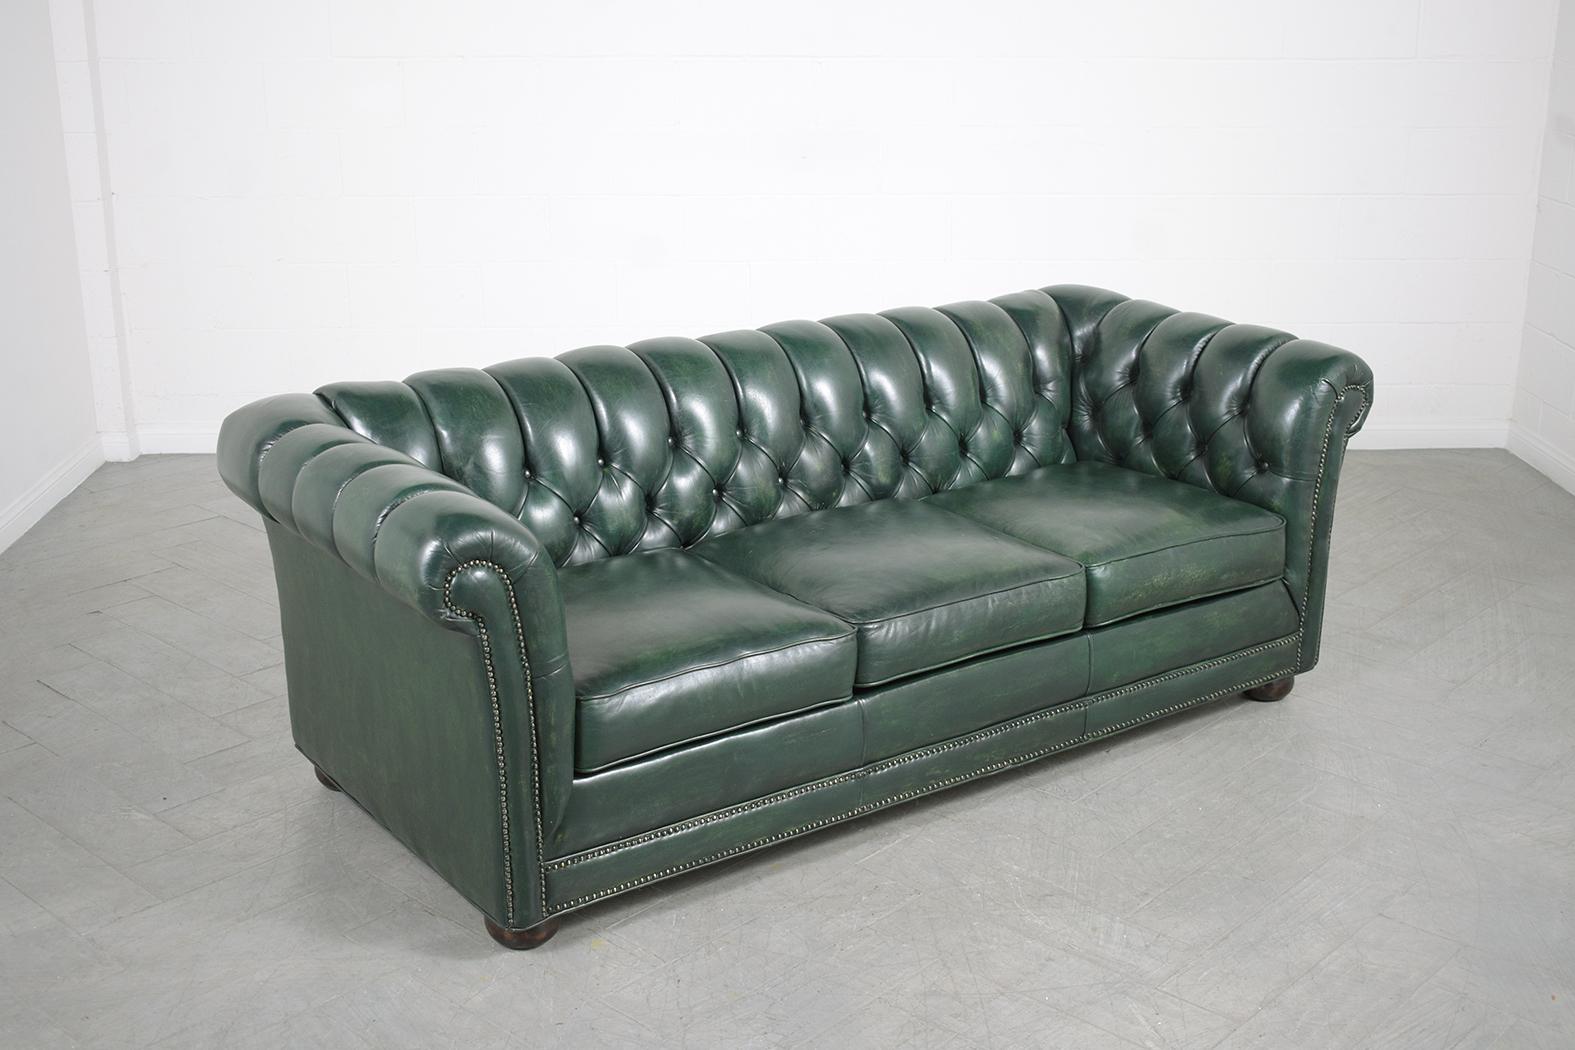 An extraordinary vintage green leather tufted chesterfield sofa in great condition the frame is crafted out of solid wood and has been completely restored by our professional in-house craftsmen team and has been newly dyed in a custom dark green